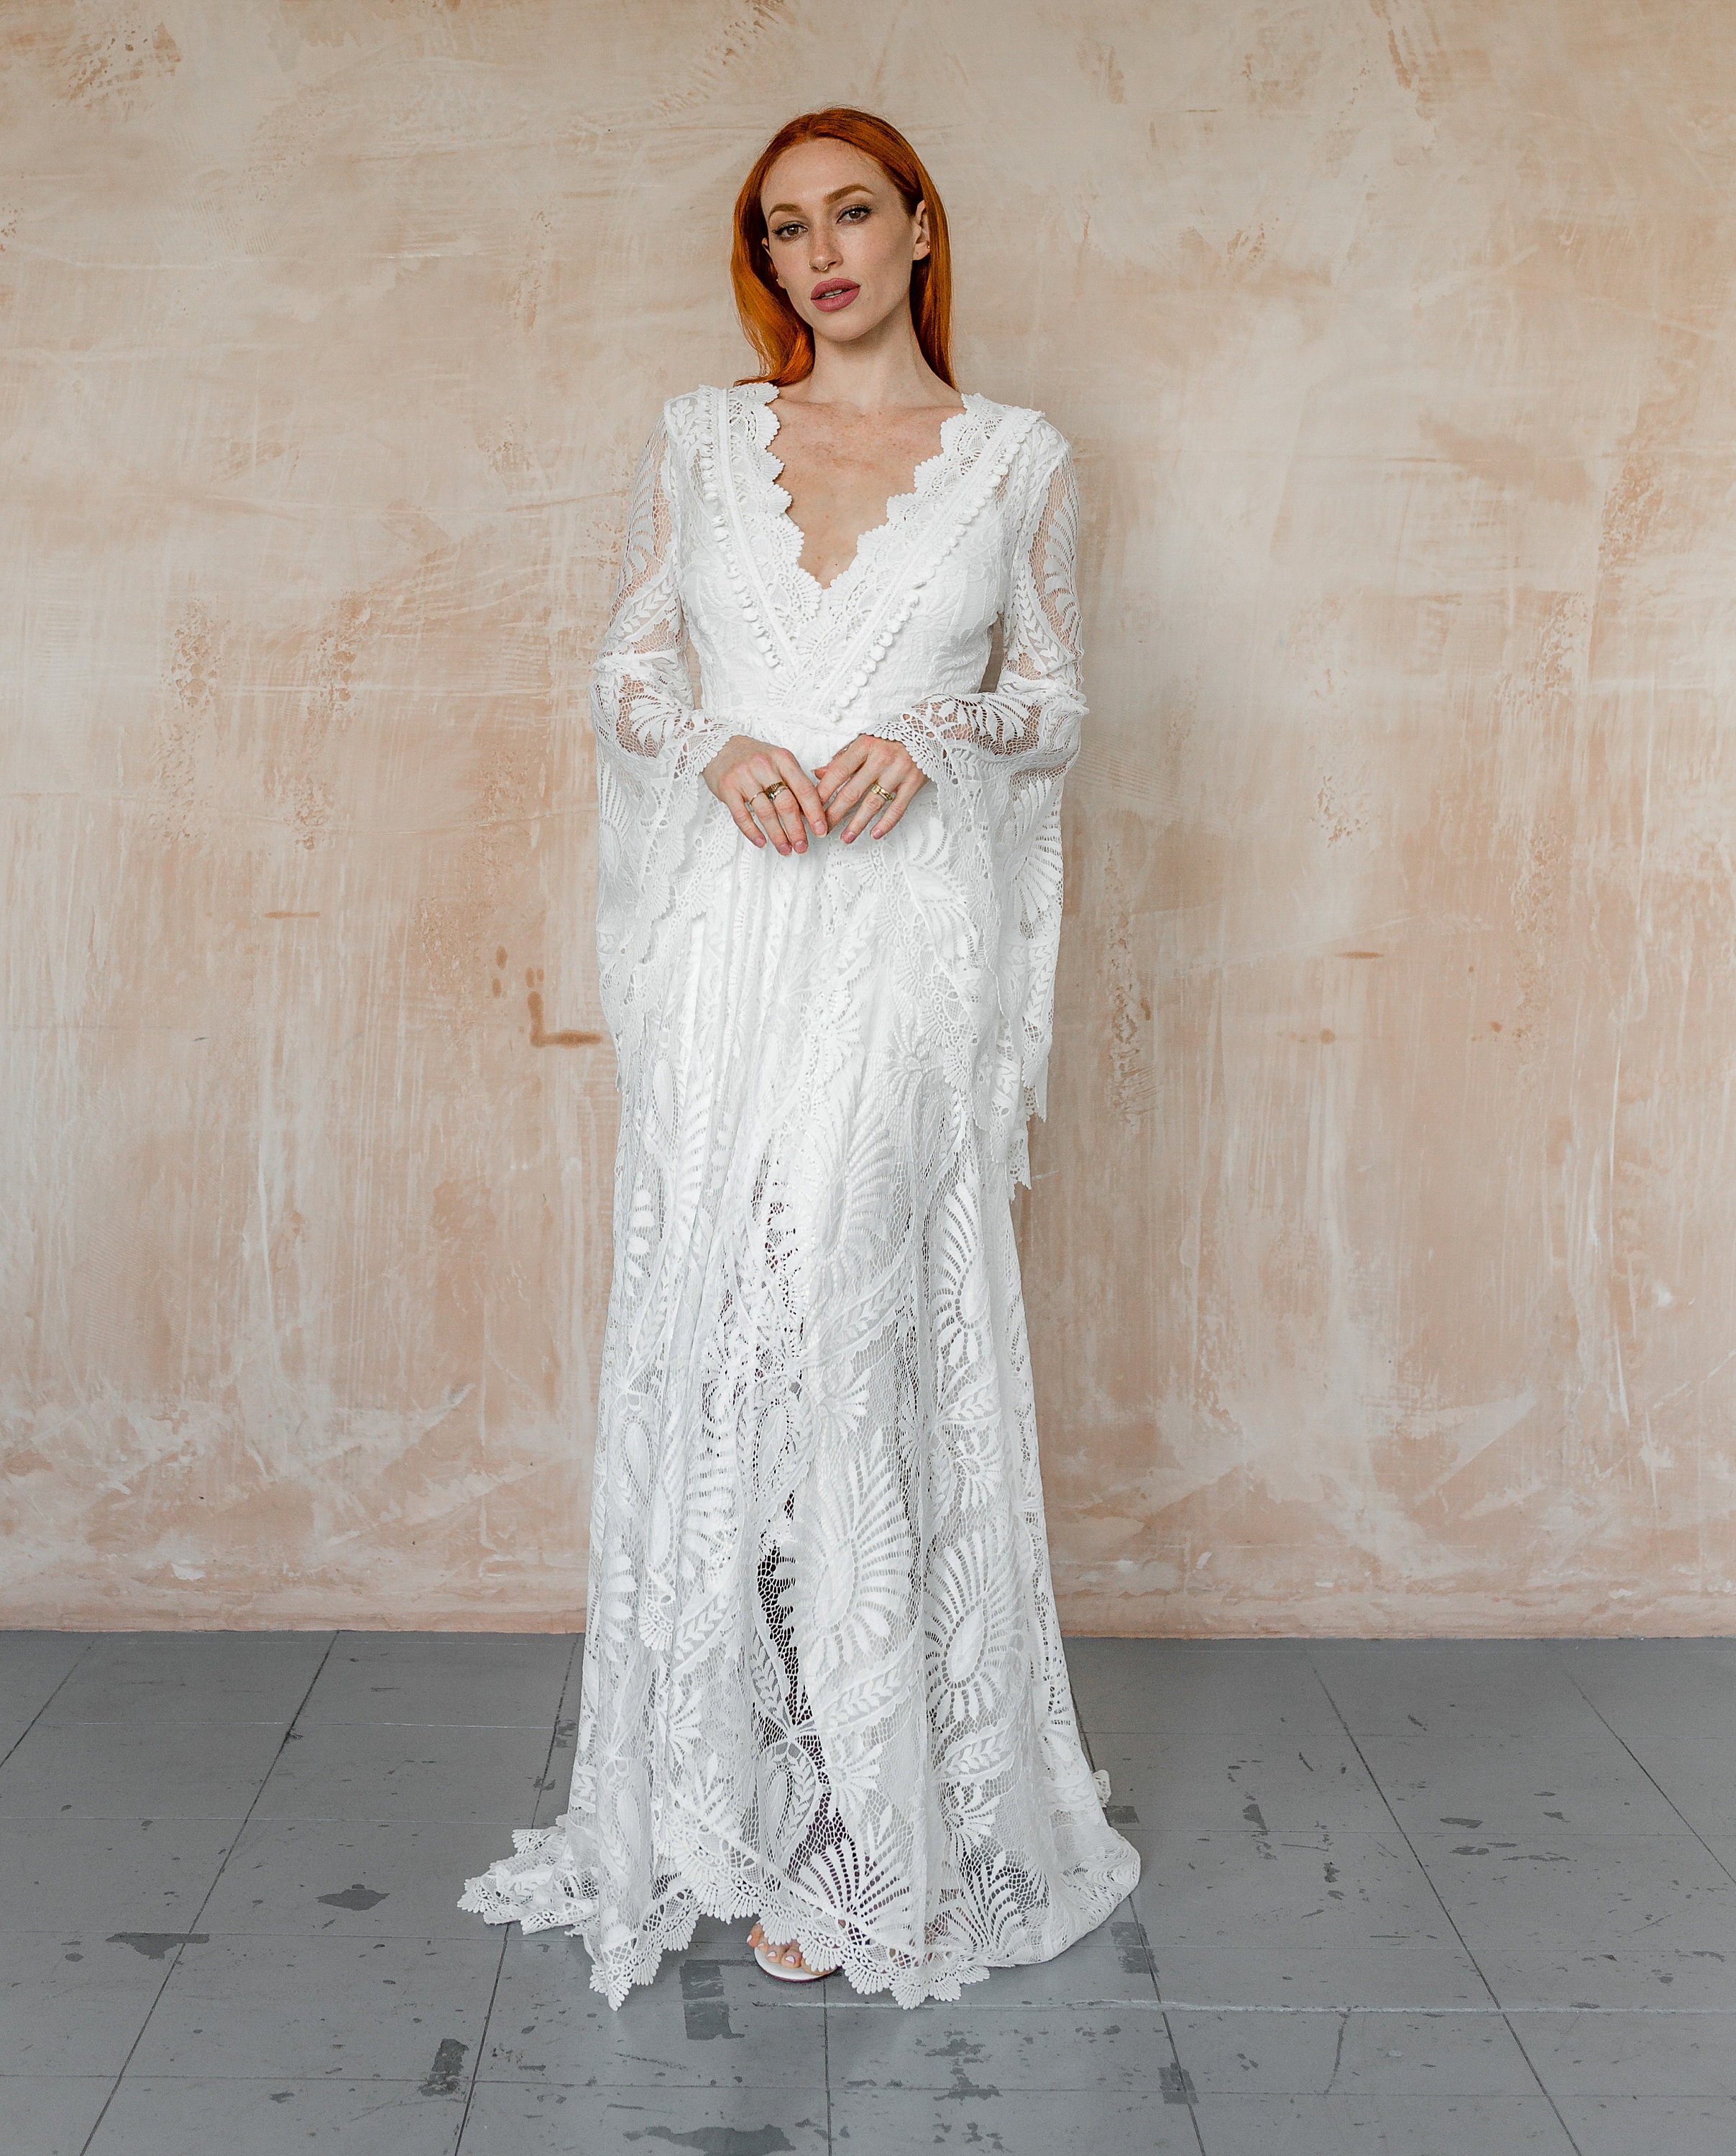 Lace Boho Wedding Dress With Long Wide Sleeves Elopement - Etsy Australia